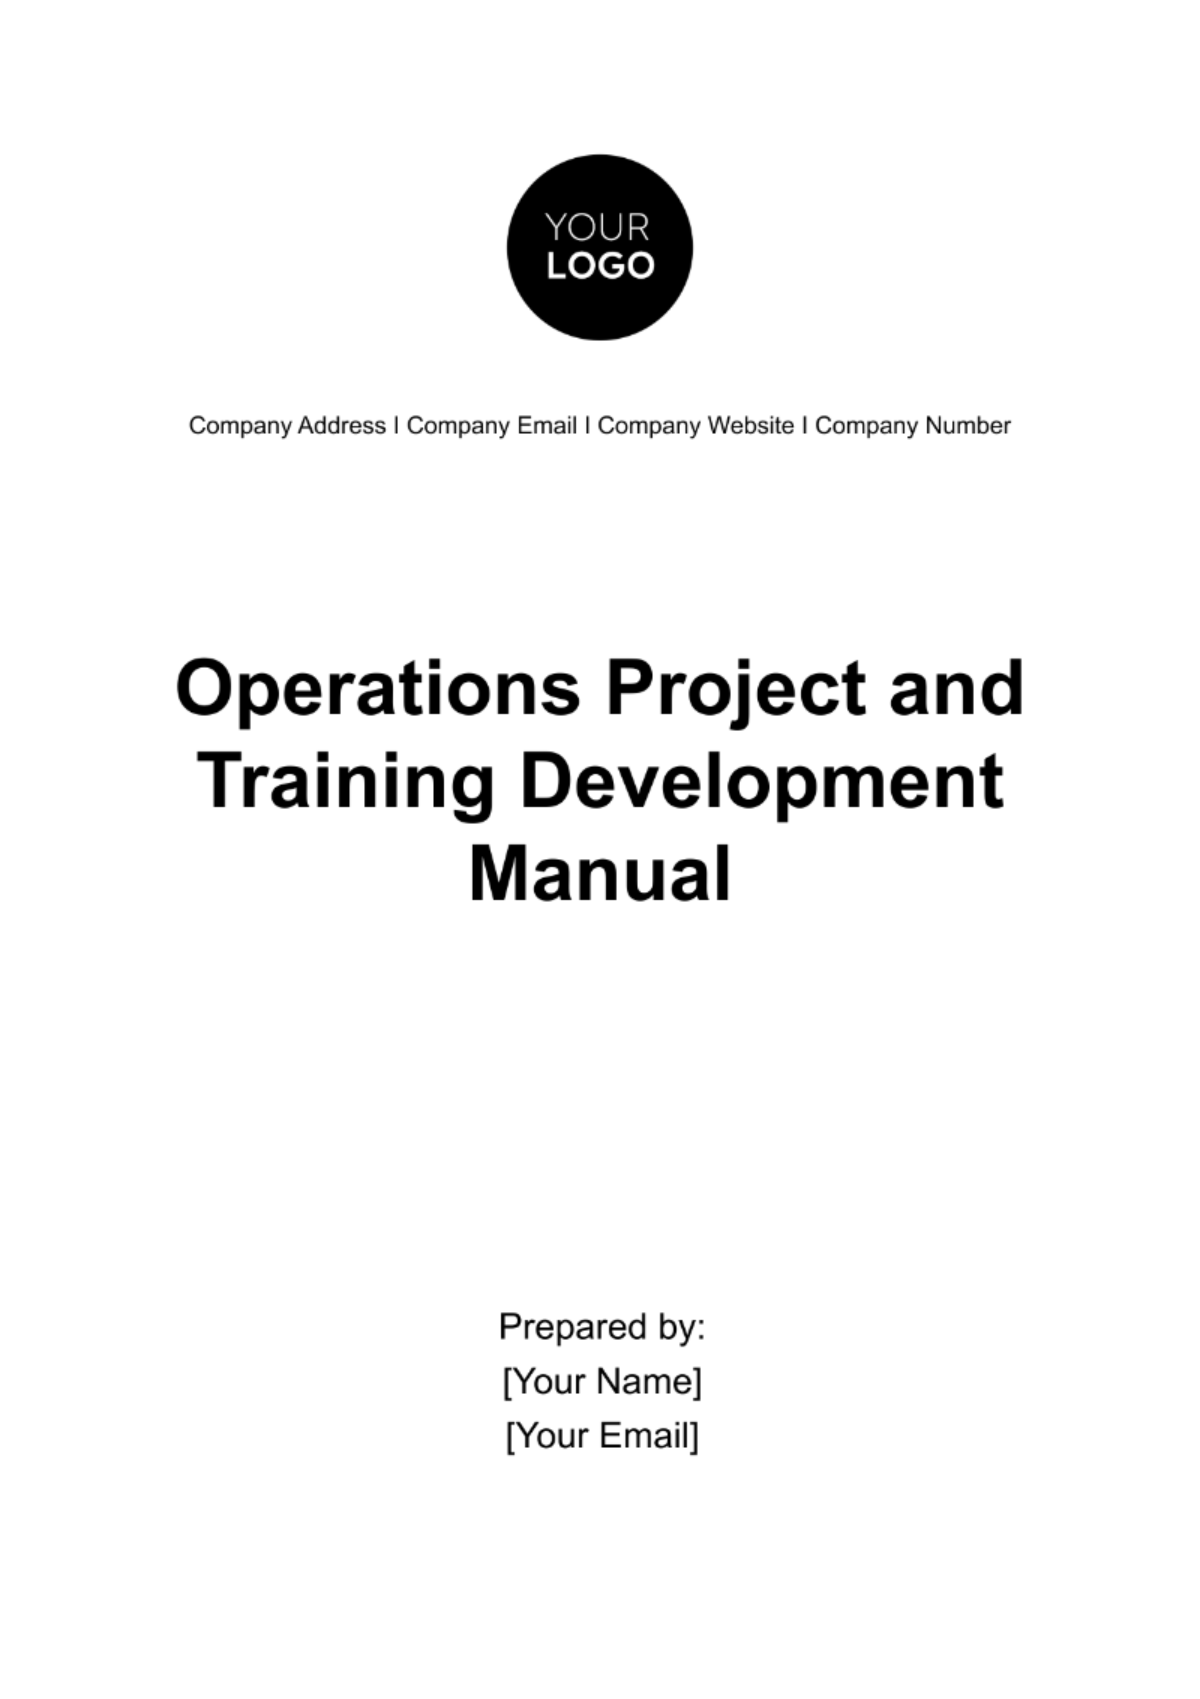 Operations Project Training and Development Manual Template